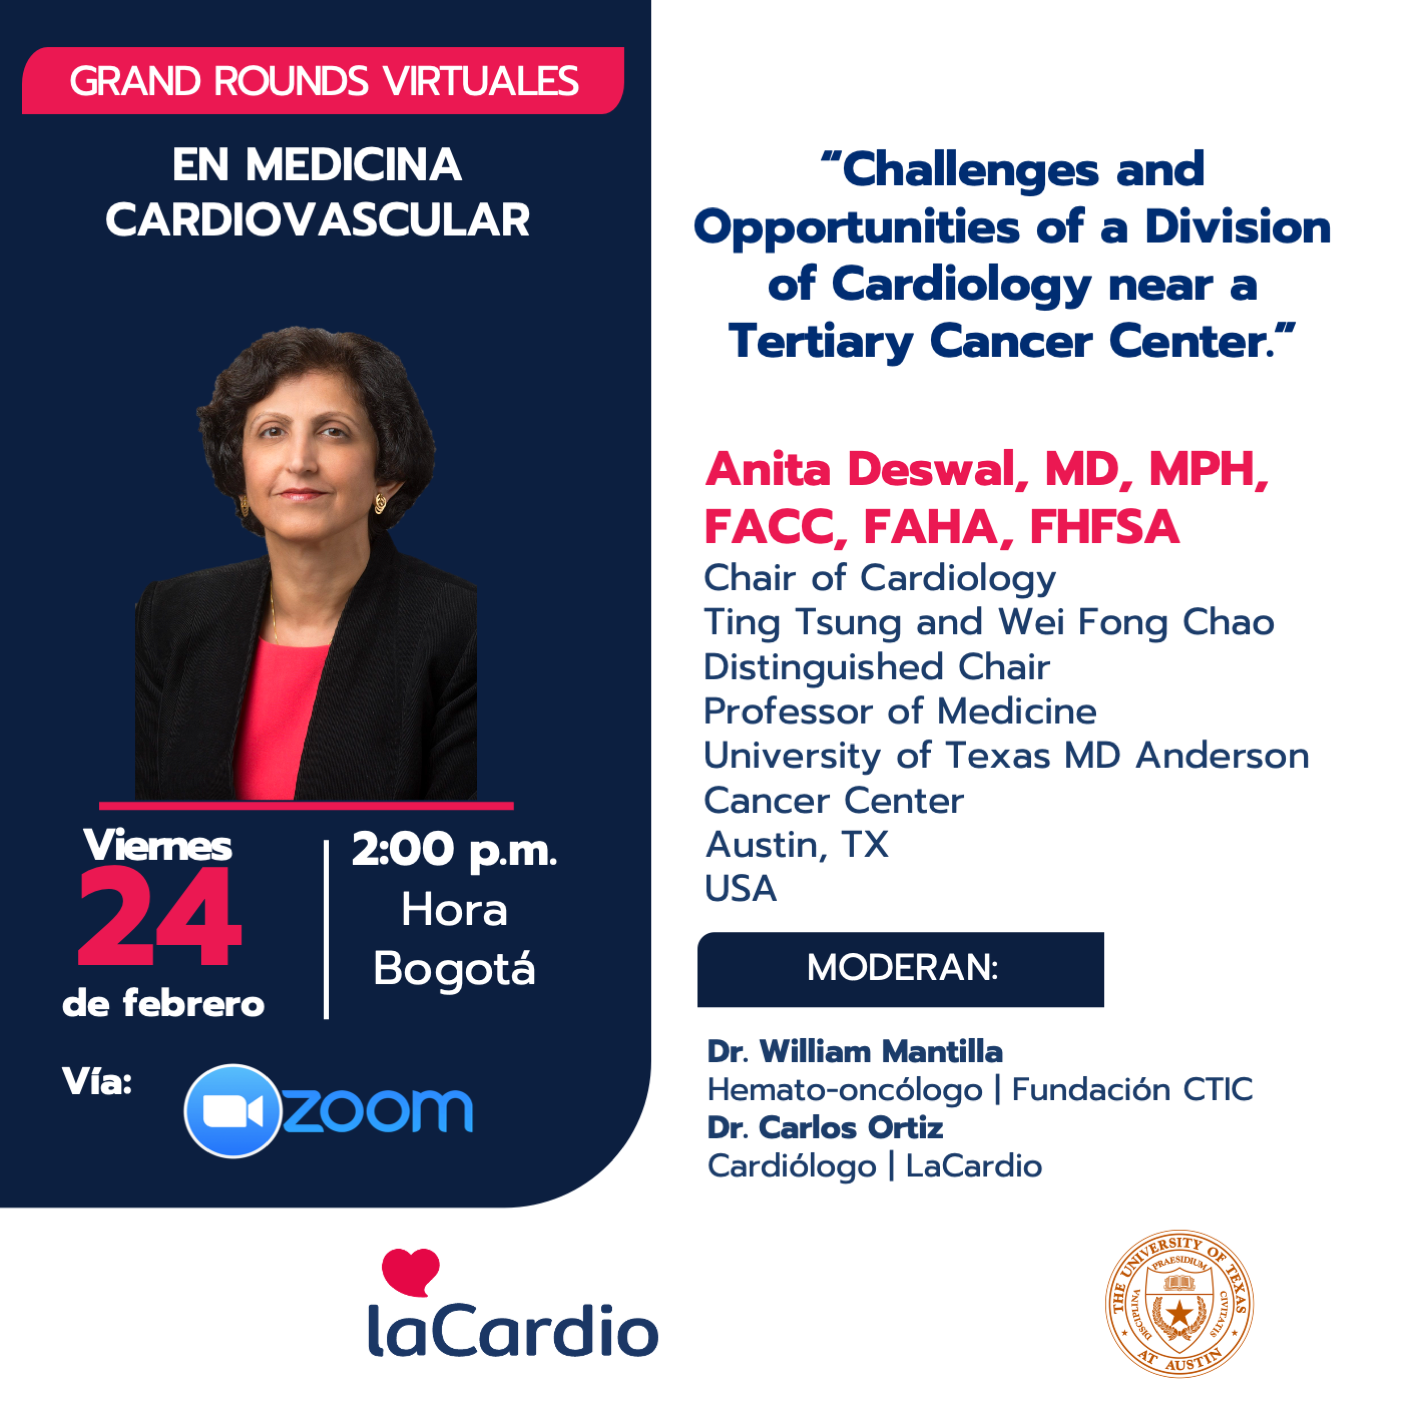 Grand Rounds Virtuales en Medicina Cardiovascular: “Challenges and Opportunities of a Division of Cardiology near a Tertiary Cancer Center.”